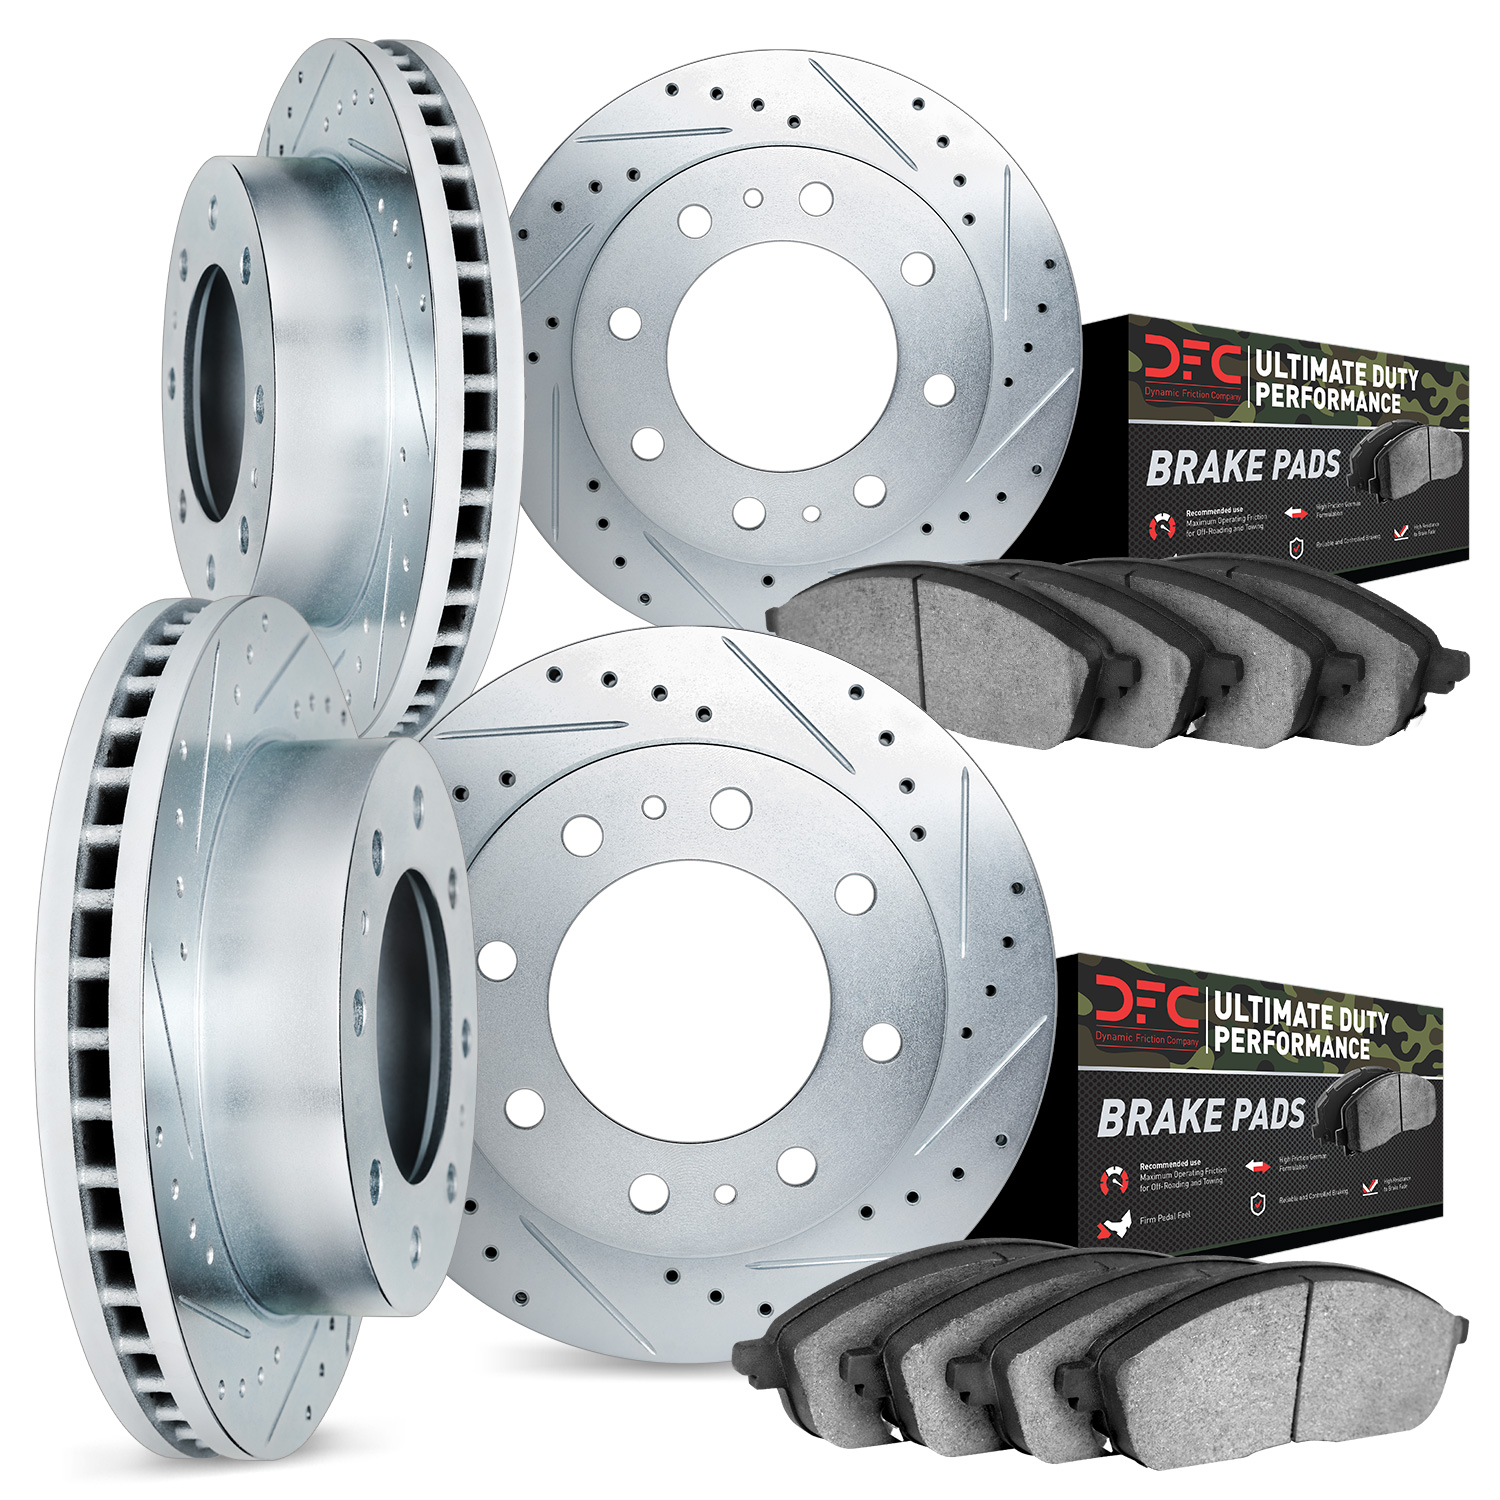 7404-54044 Drilled/Slotted Brake Rotors with Ultimate-Duty Brake Pads Kit [Silver], 2006-2010 Ford/Lincoln/Mercury/Mazda, Positi